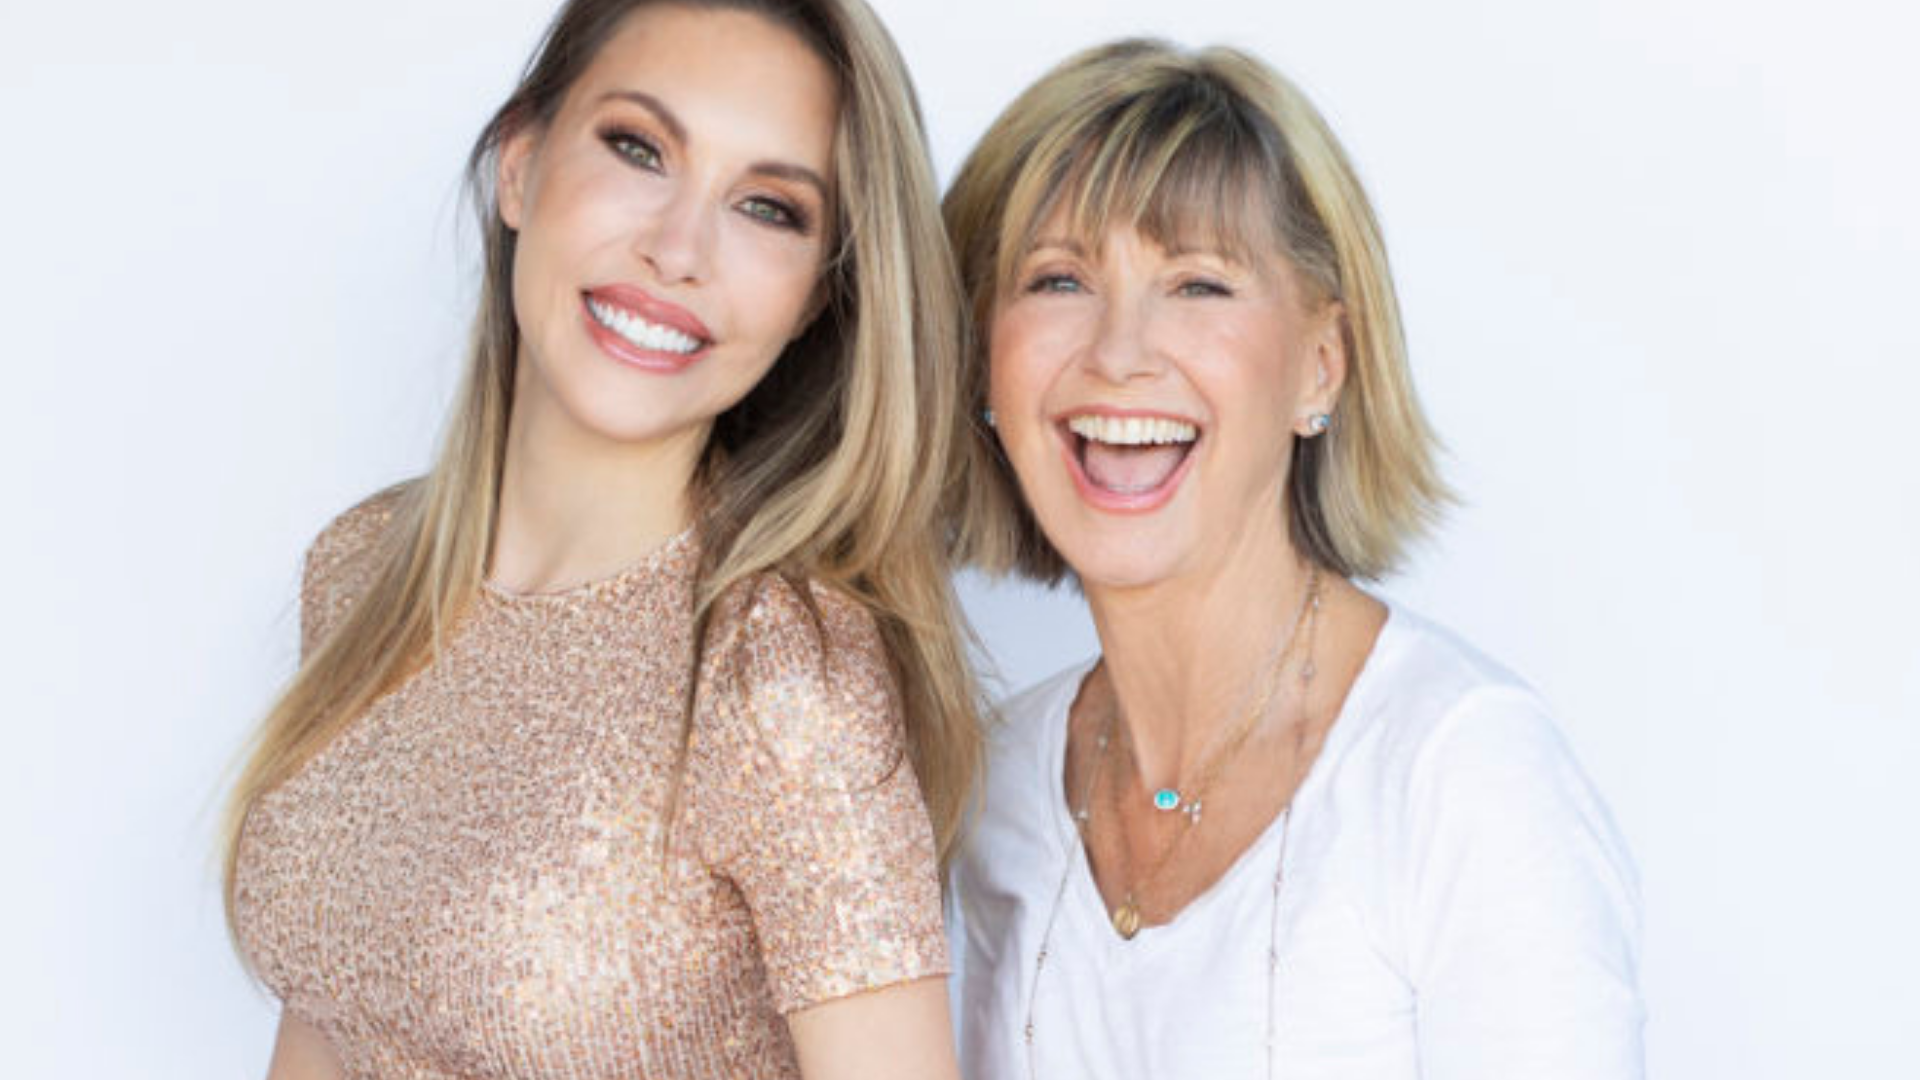 Olivia Newton-John and daughter Chloe Lattanzi moved in together during lockdown. Image credit: Michelle Day